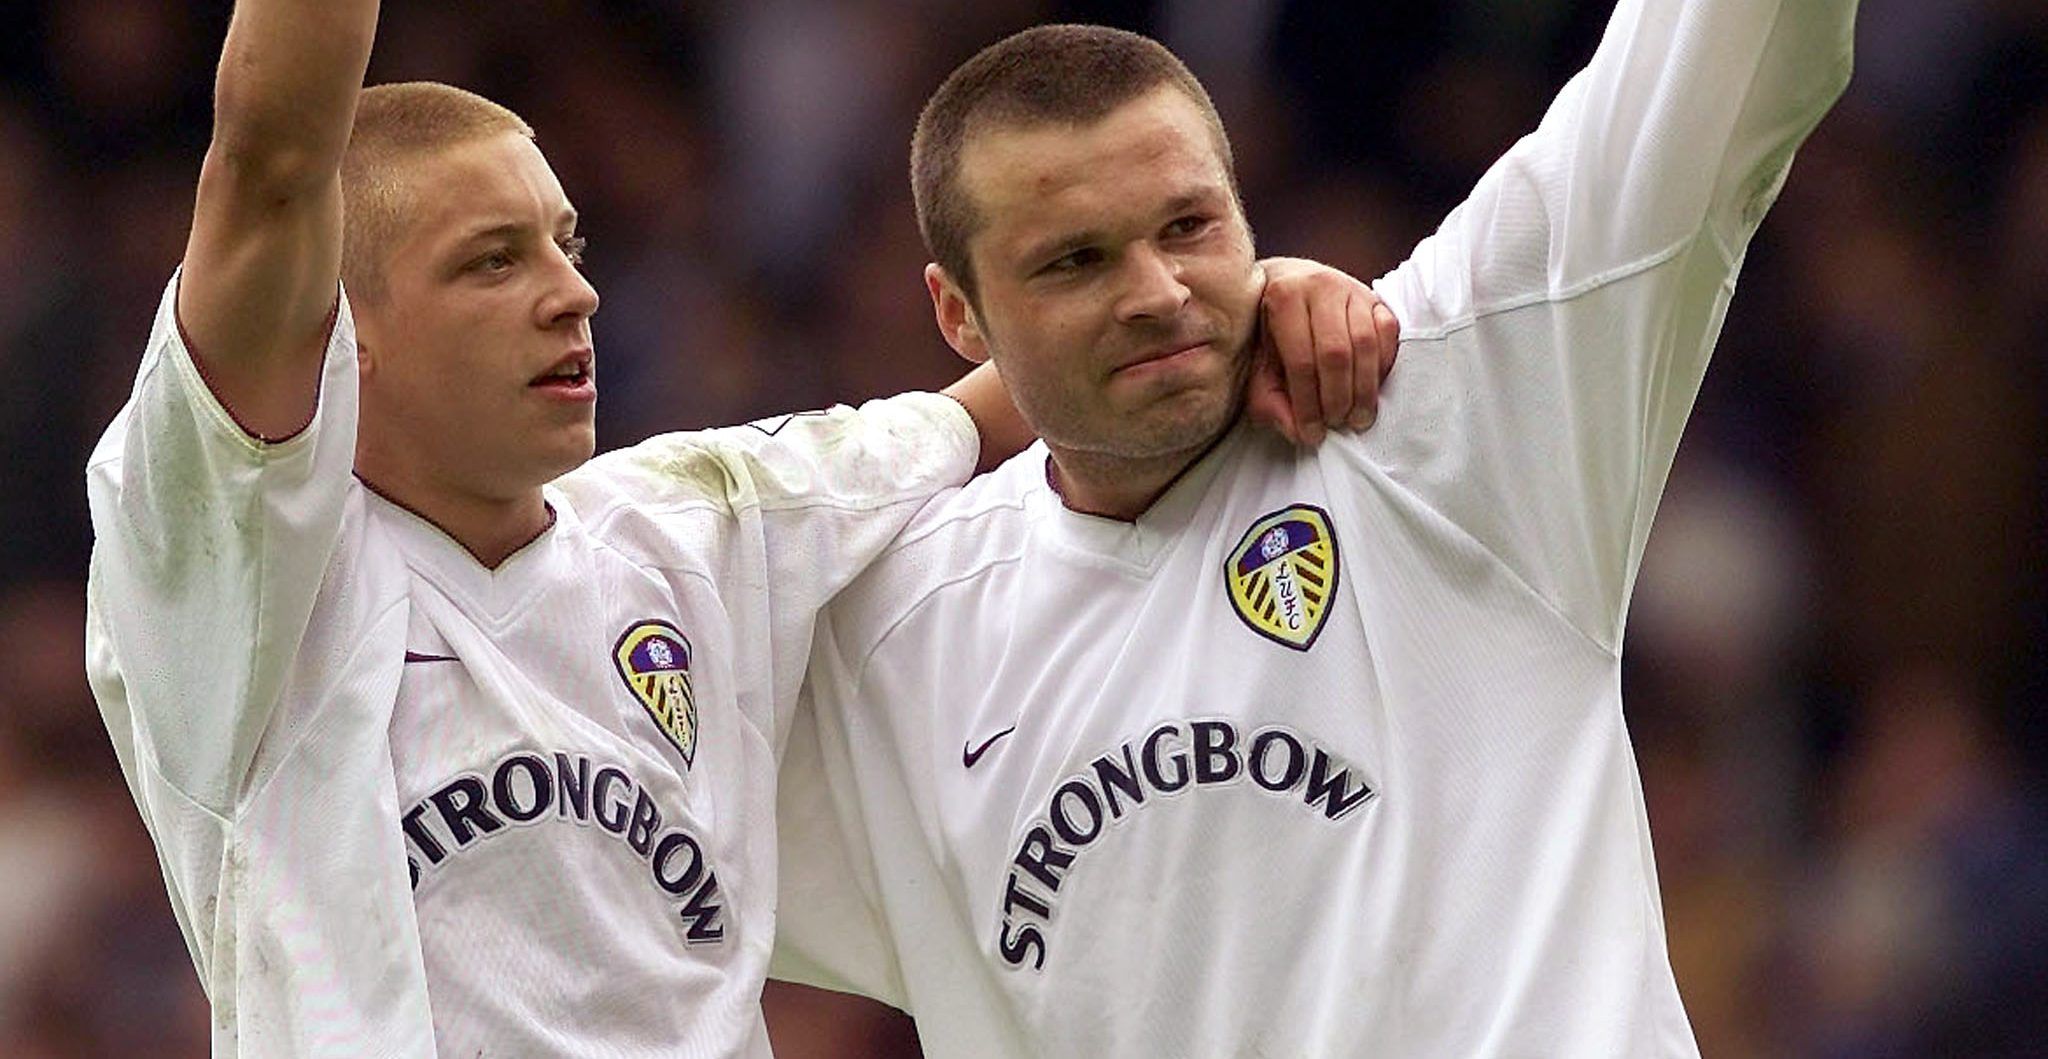 Leeds United's Alan Smith (L) celebrates with Mark Viduka (R) after scoring against Leicester City in the English Premier League at Elland Road, Leeds, May 19, 2001. The match finished 3-1 to Leeds United. REUTERS/Ian Hodgson NO ONLINE/INTERNET USAGE WITHOUT FAPL LICENCE. FOR DETAILS SEE WWW.FAPLWEB.

IH/MC